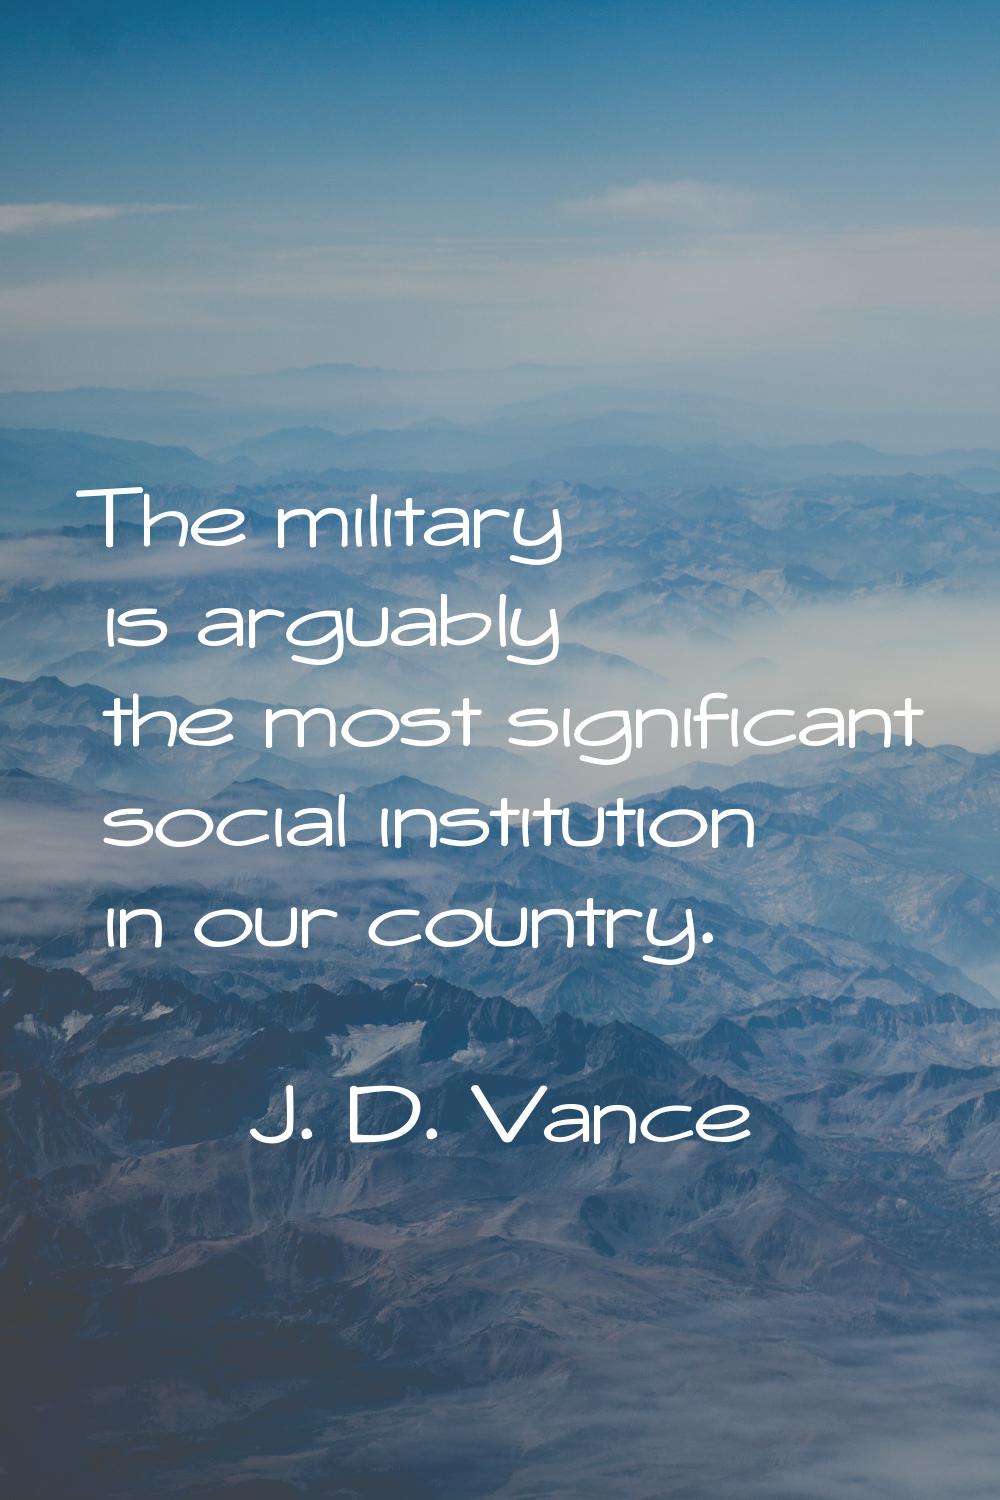 The military is arguably the most significant social institution in our country.